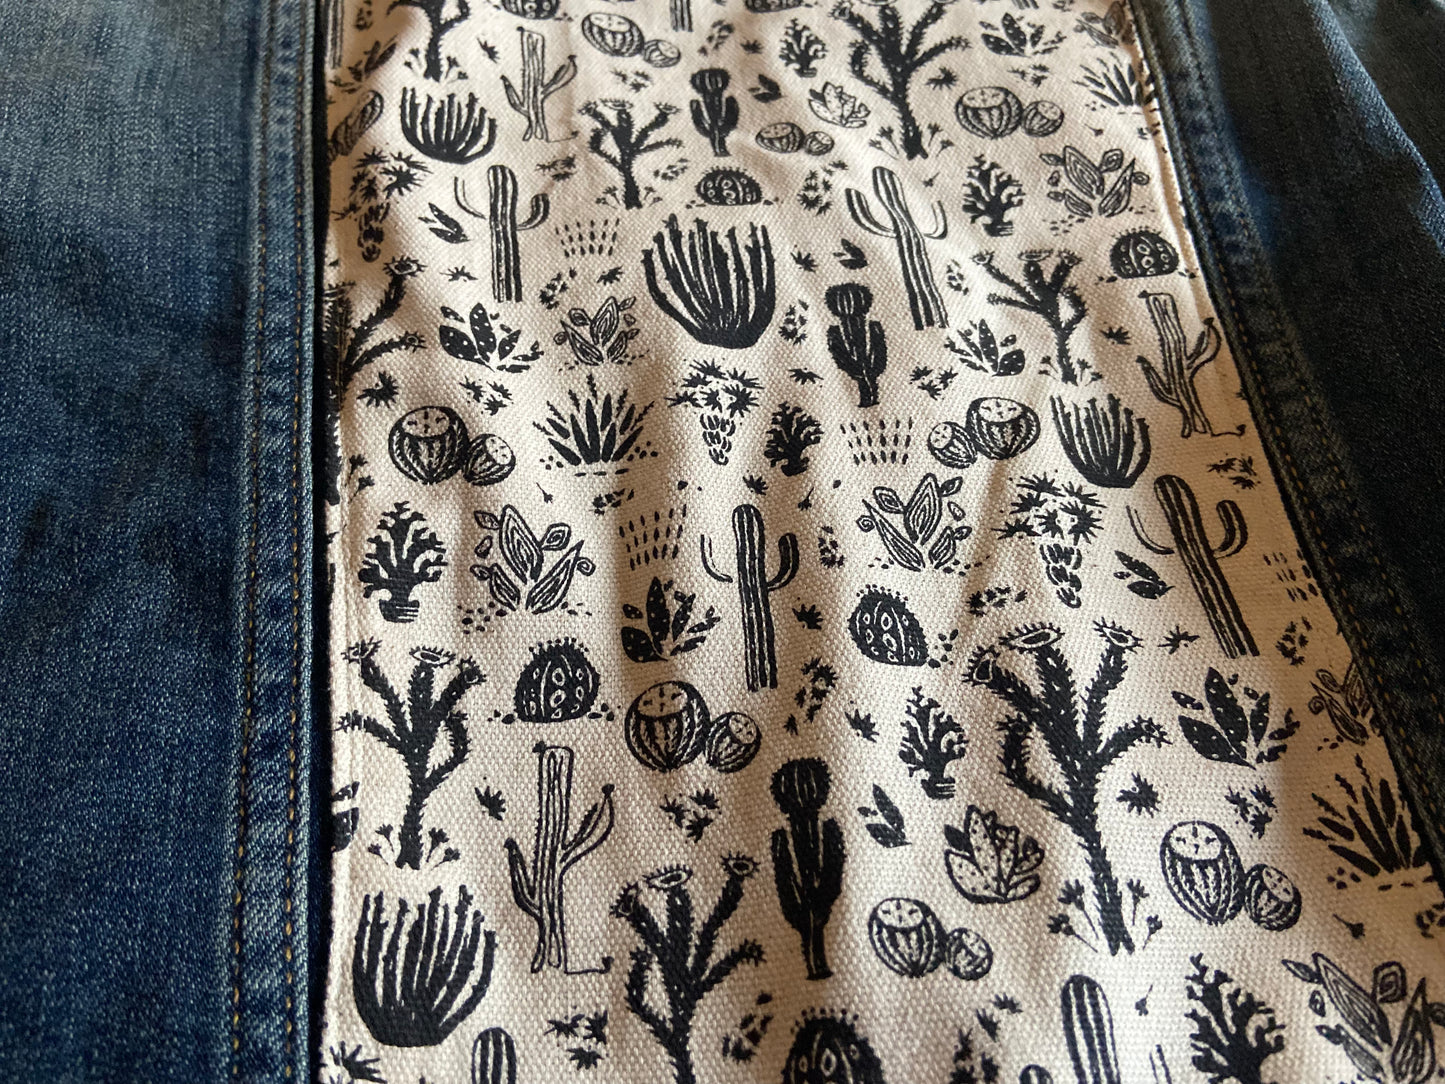 One of a Kind Upcycled Jean with Hand Printed Cactus Cotton Fabric